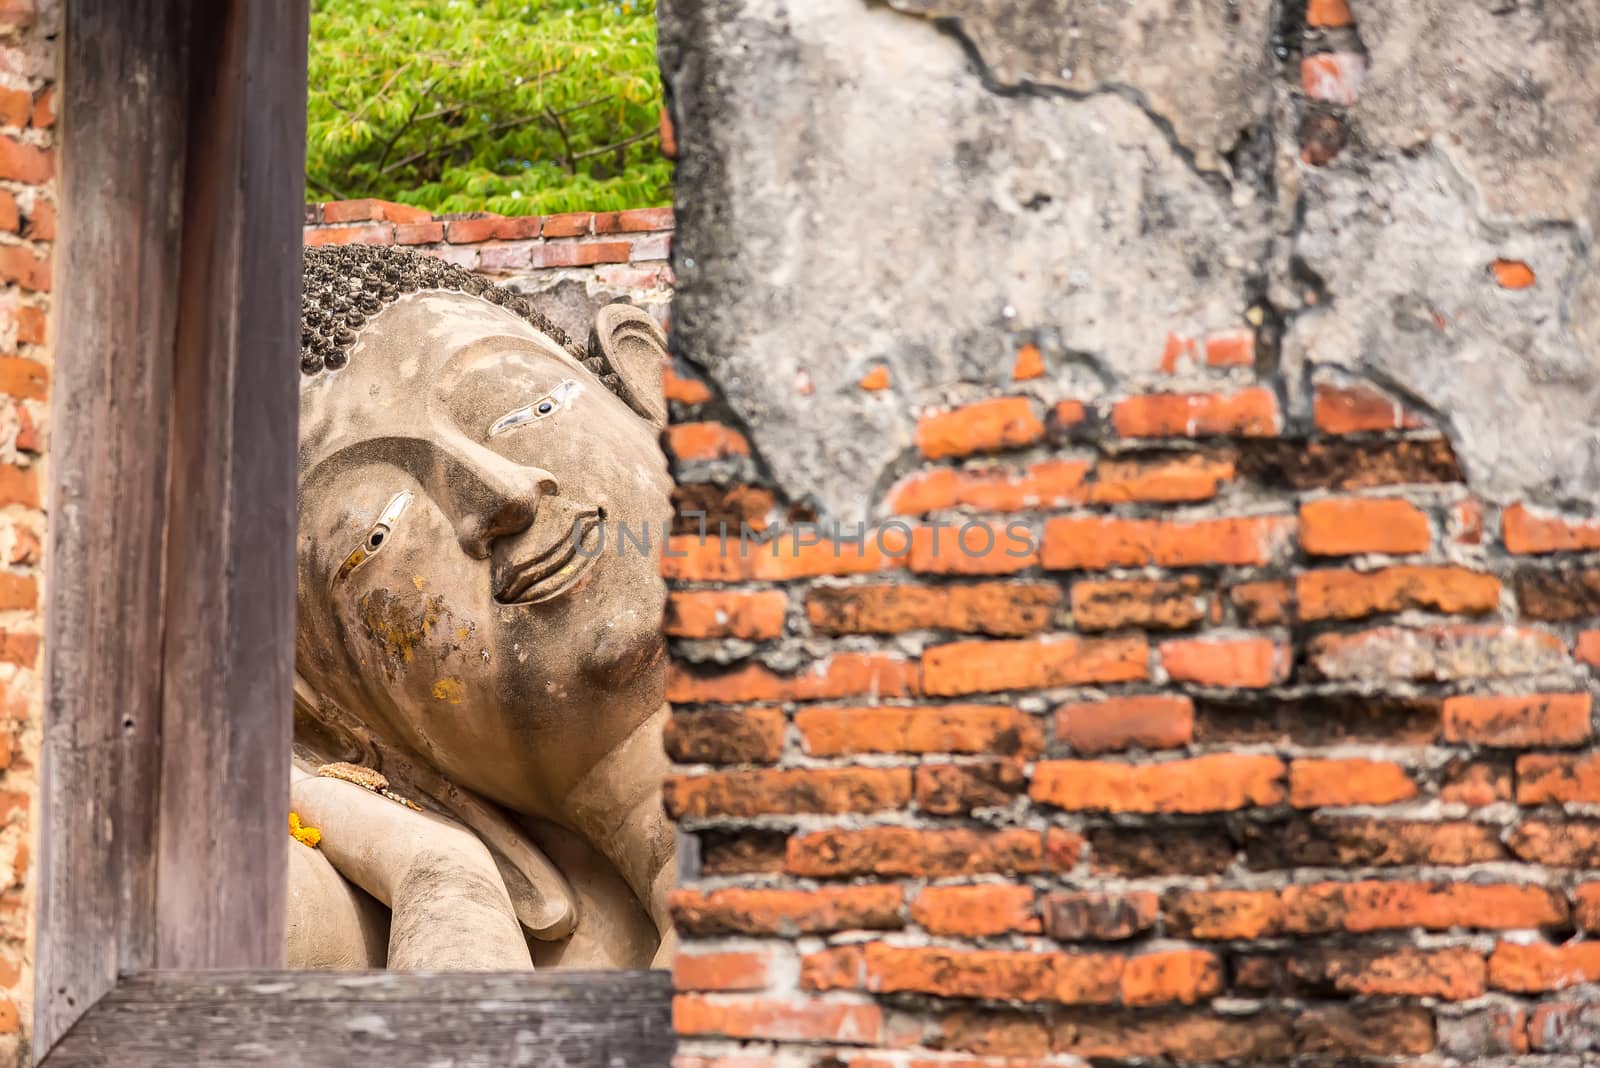 Ayutthaya Thailand June 13, 2020 : Reclining Buddha in the temple,Archaeological site,Pagoda Putthaisawan Temple Ayutthaya , Thailand